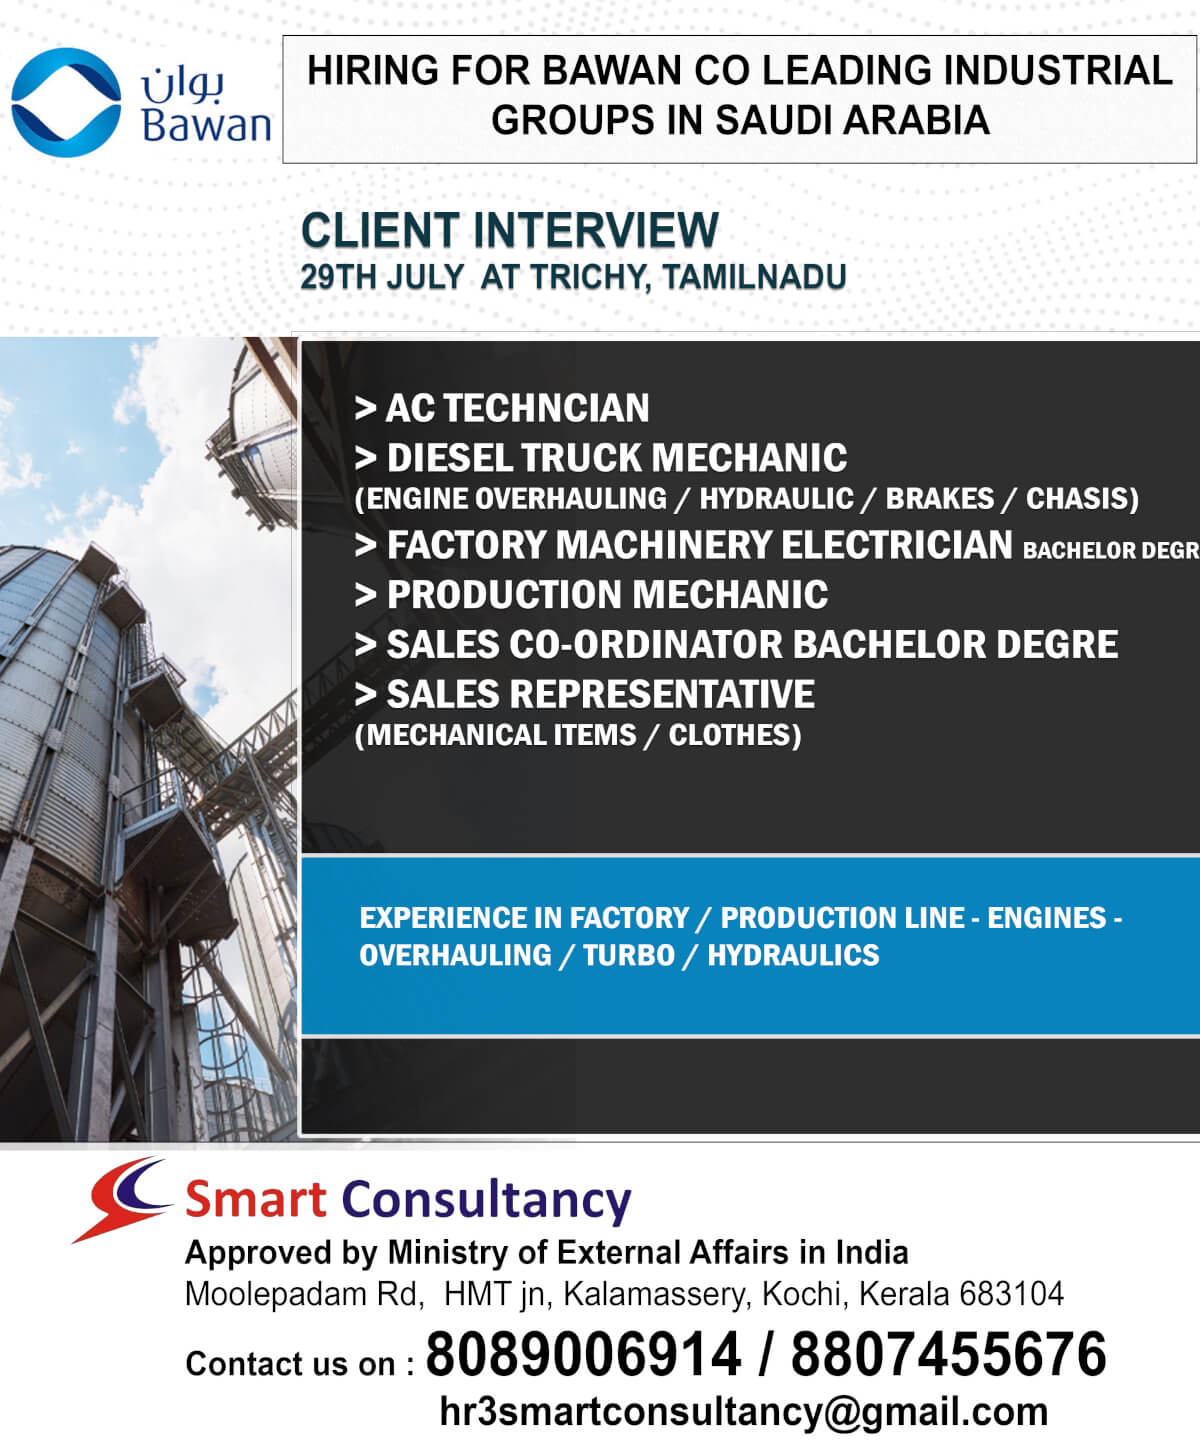 AL FOZAN HOLDING JOBS DIRECT CLINET INTERVIEW  ON 29TH JULT AT TRICHY